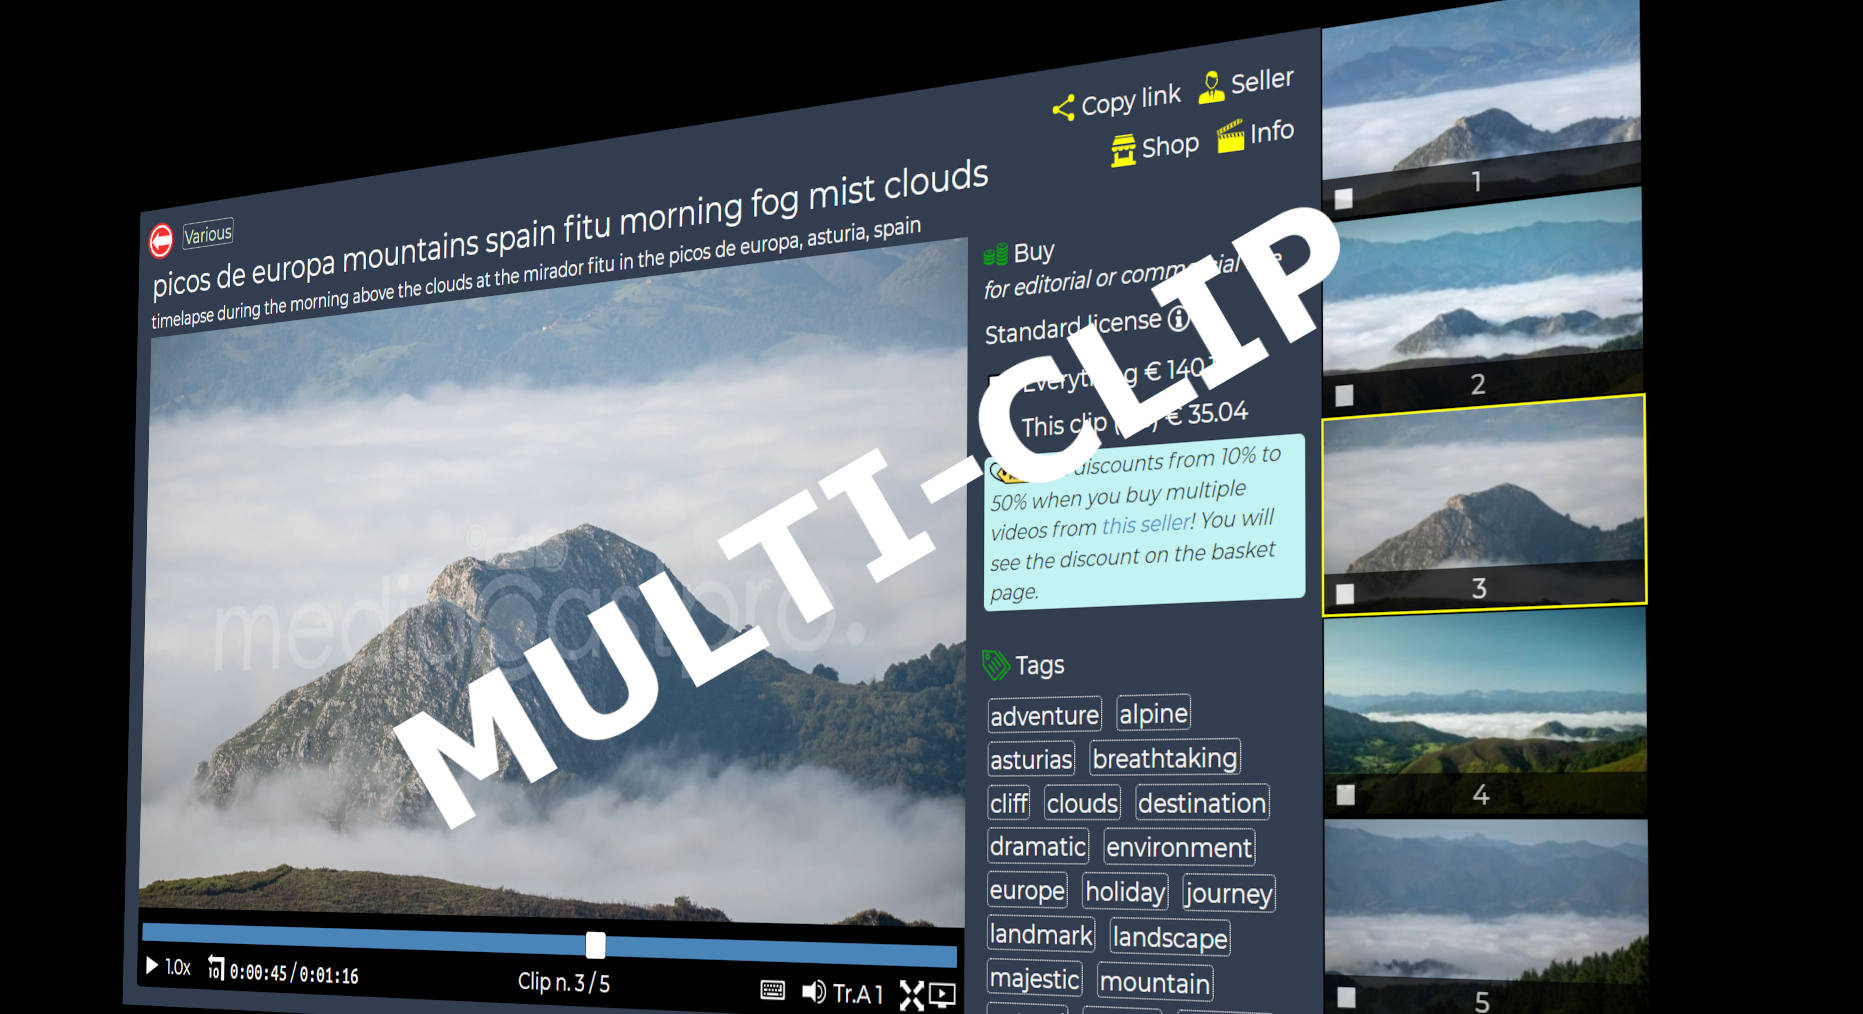 How to sell and buy multi-clip videos